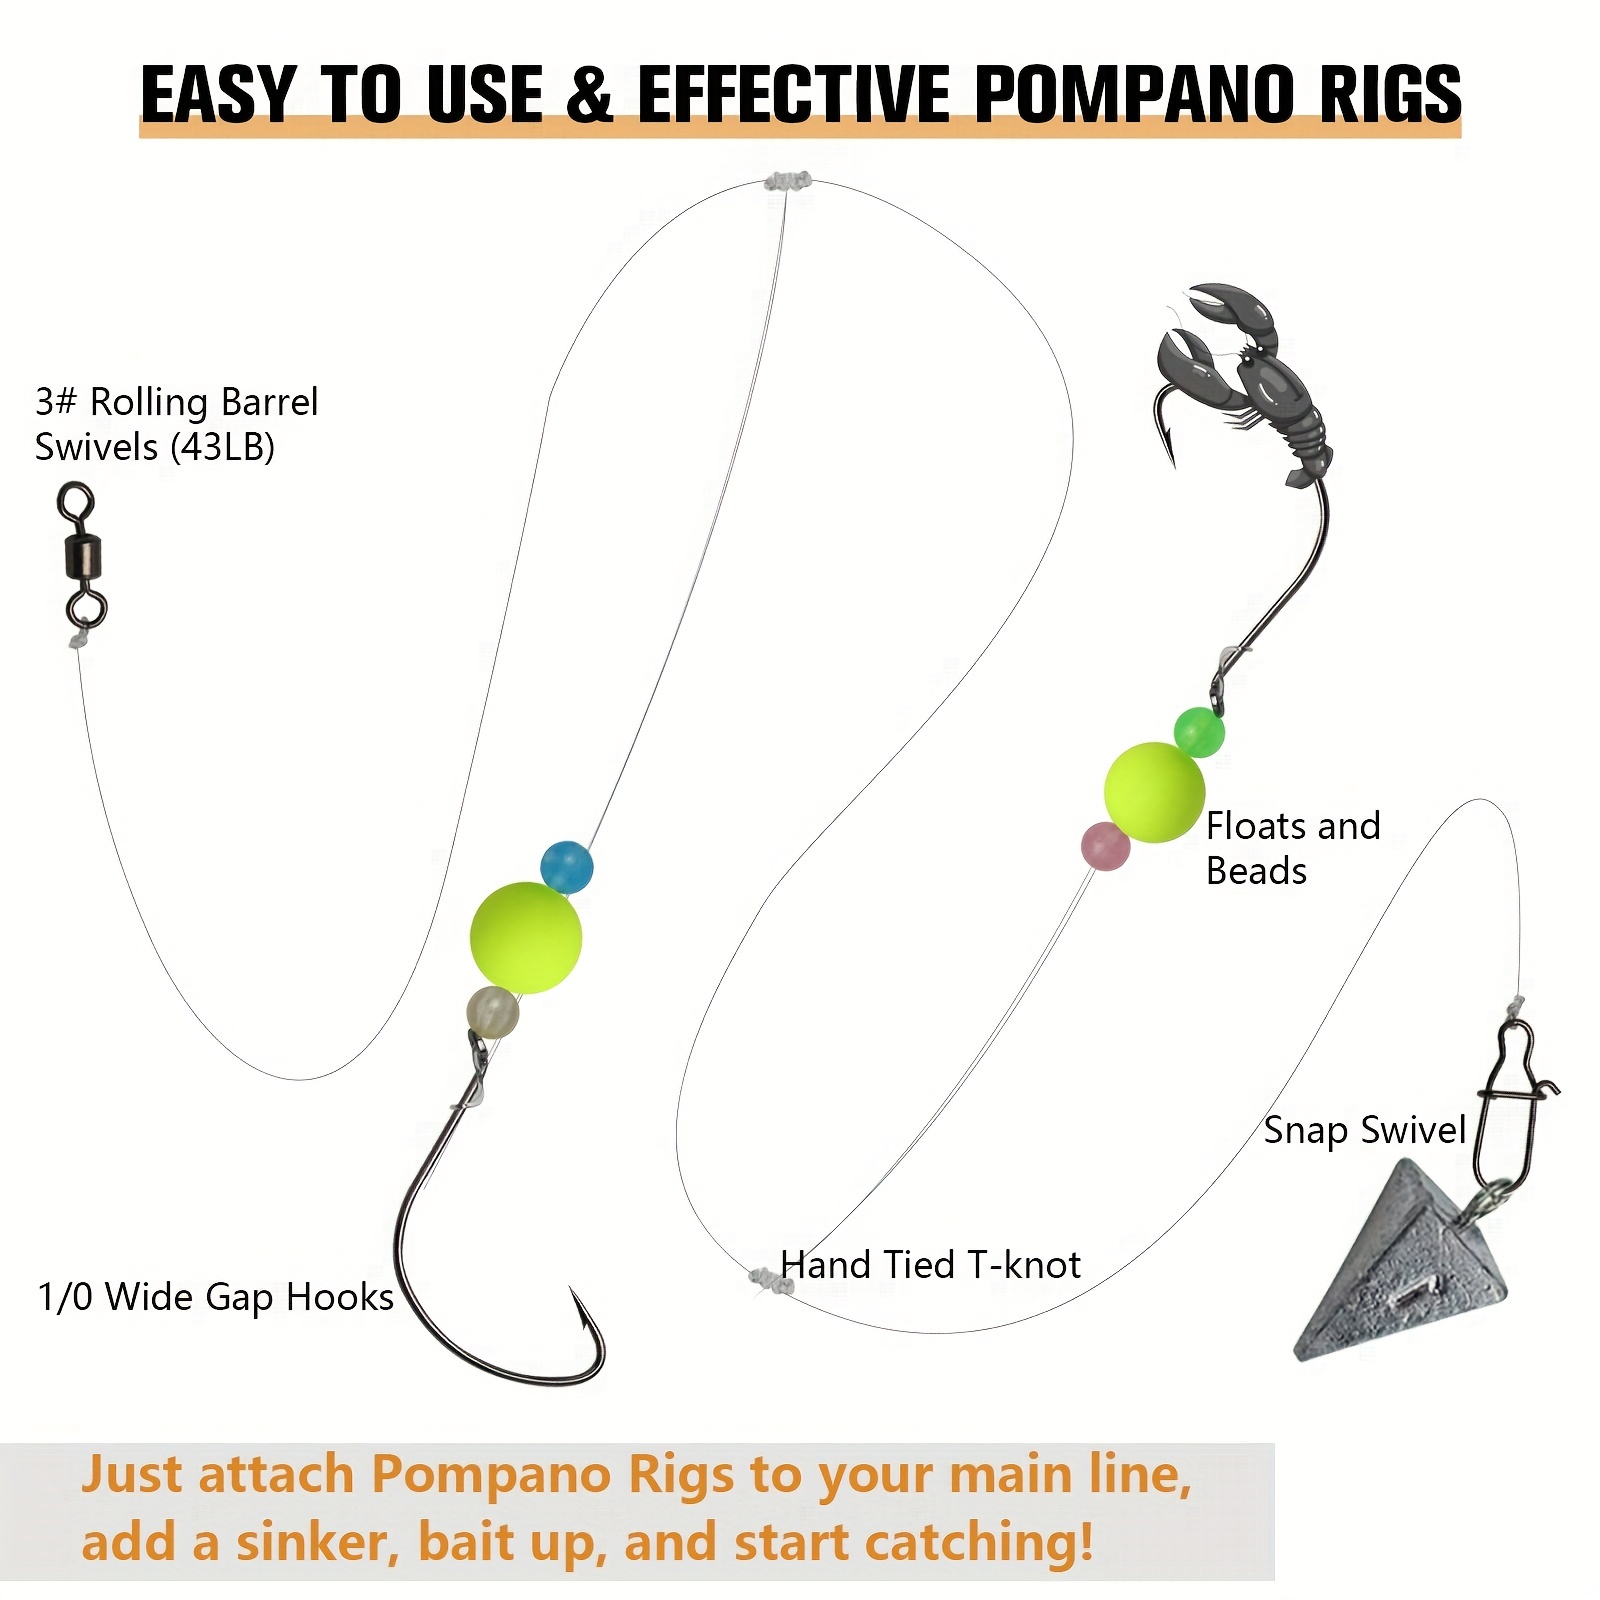 Pompano Rigs and Floats